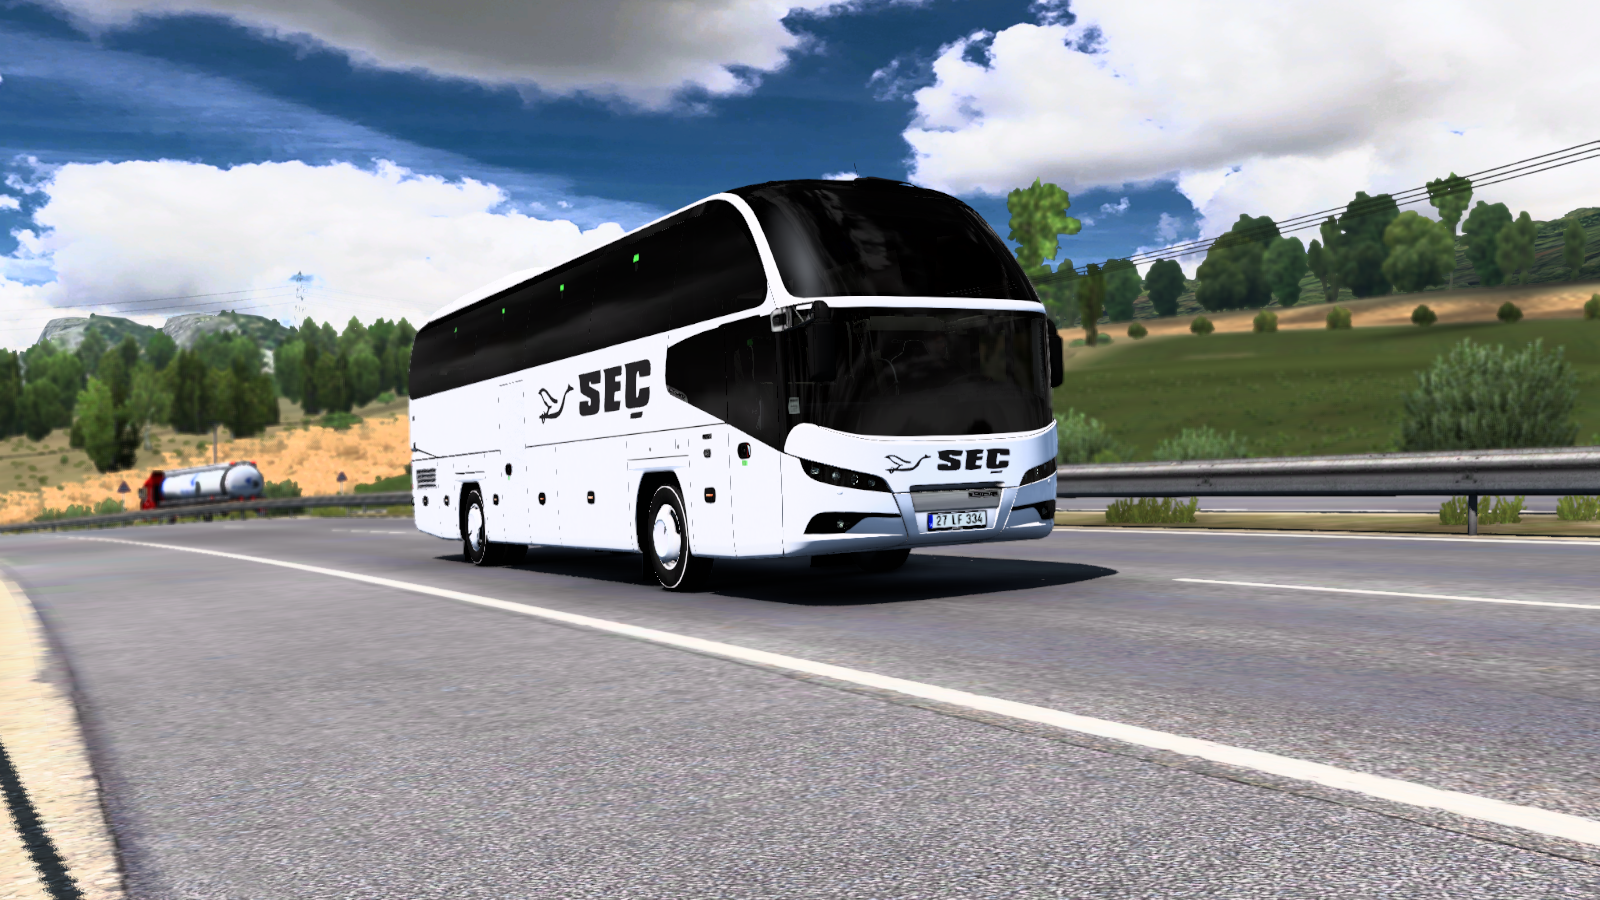 ets2_20210719_113037_00.png